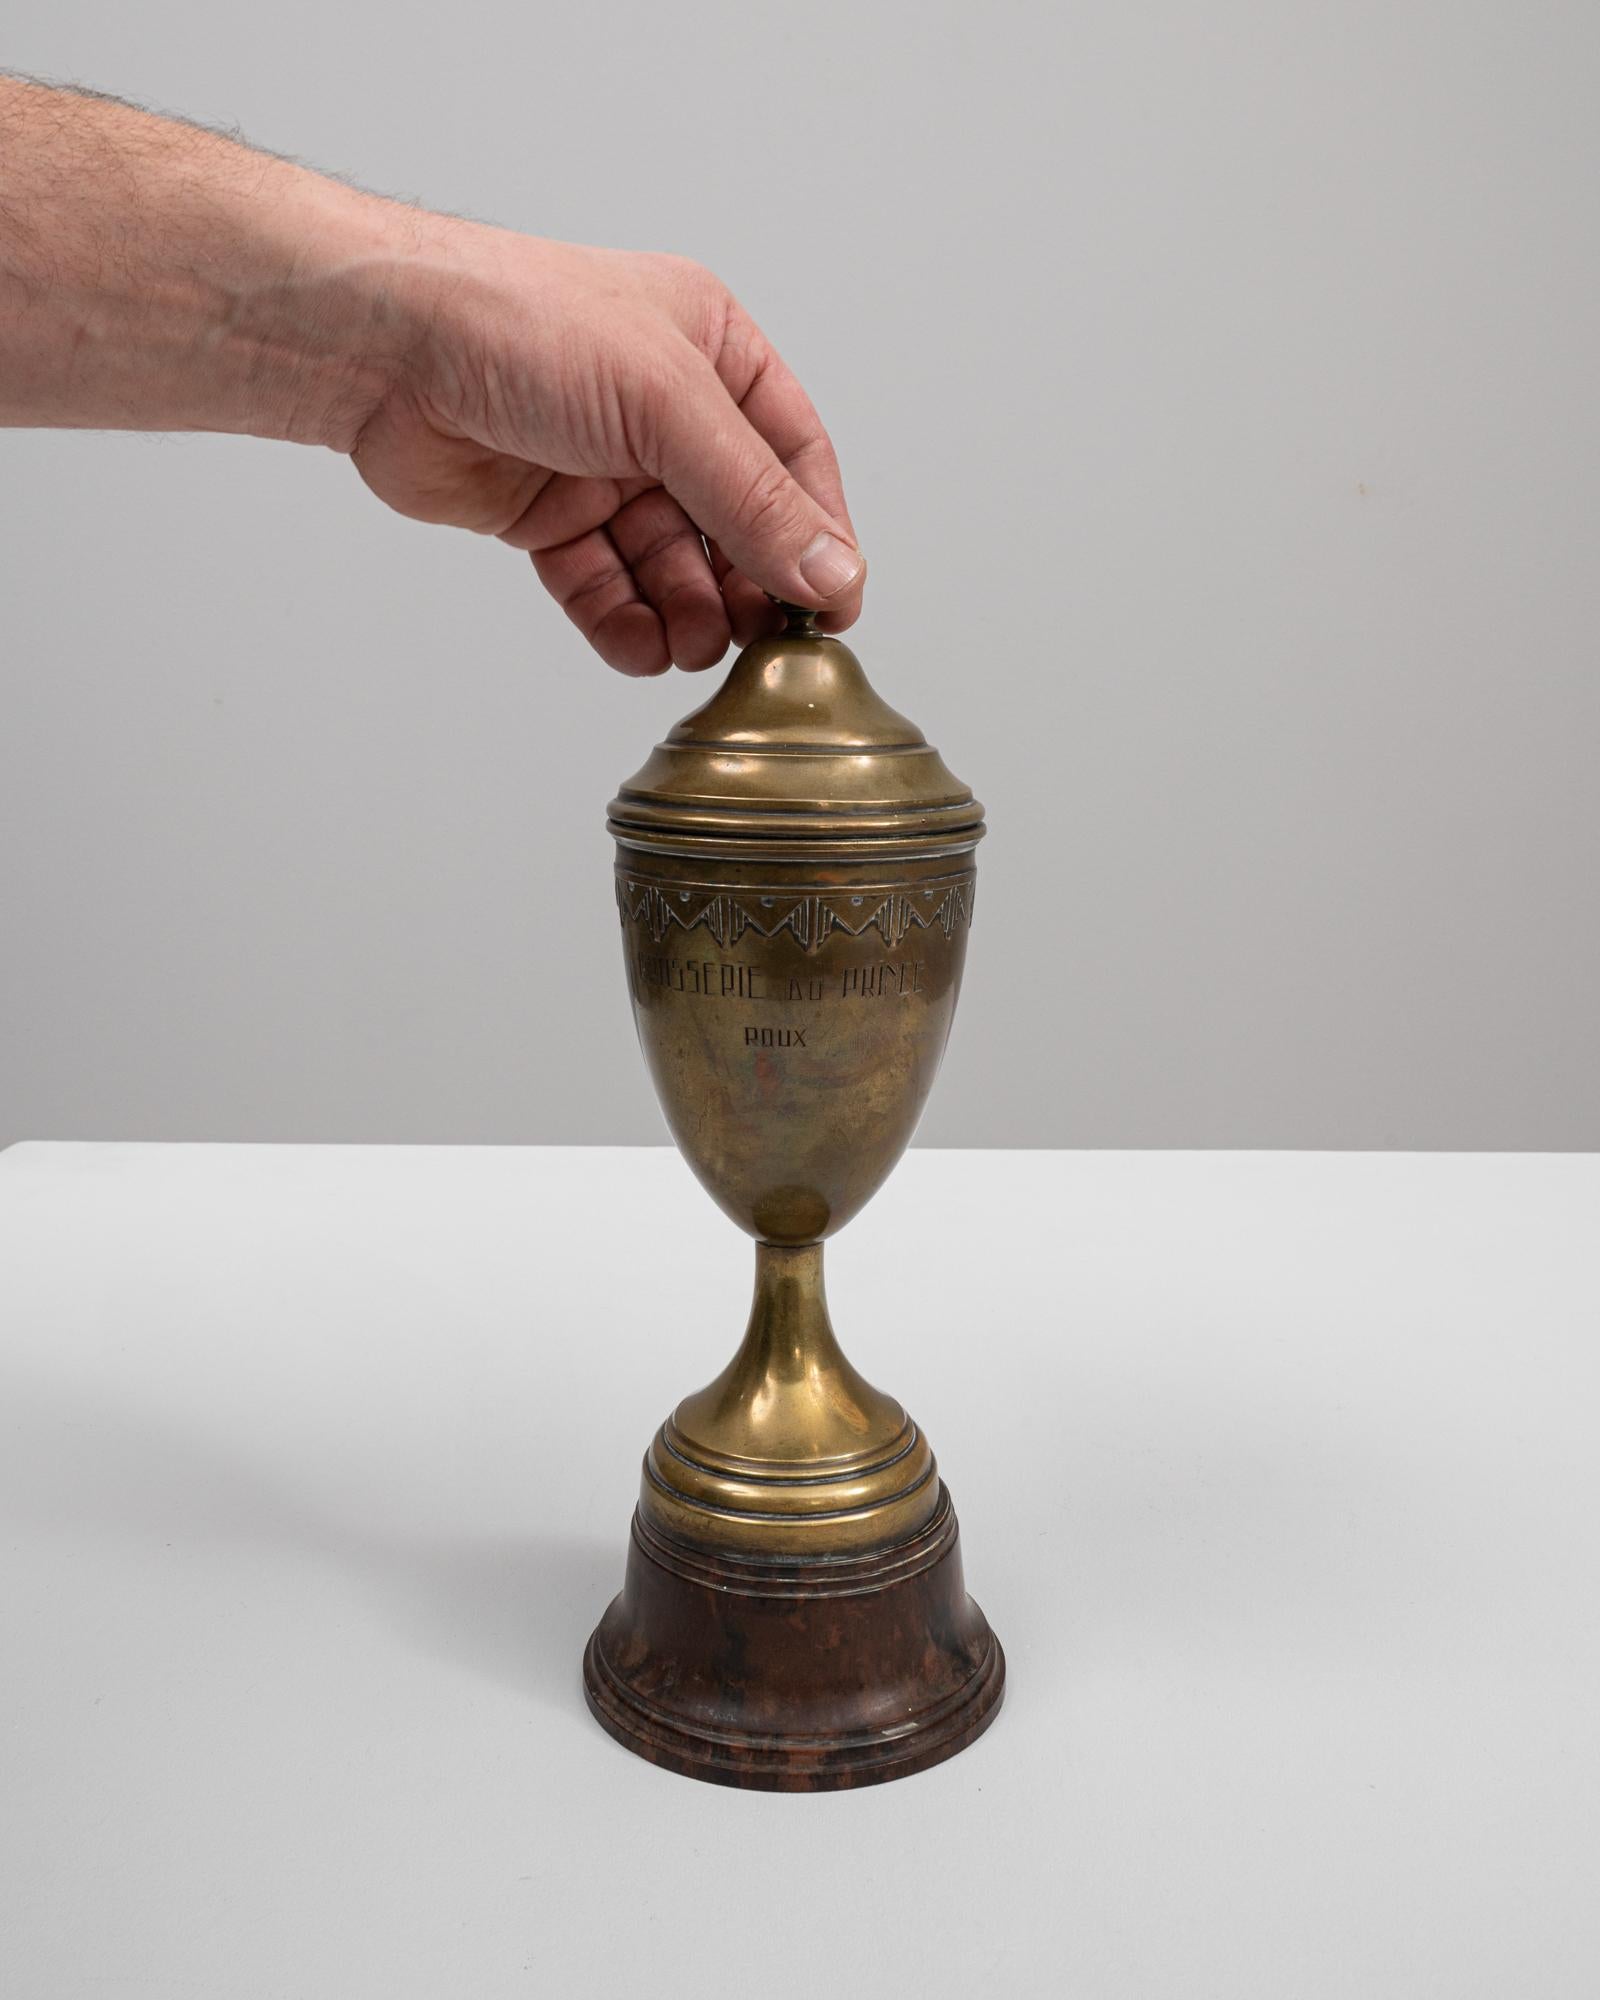 This 20th-century Belgian brass goblet is a piece rich in history and character, hailing from the renowned 